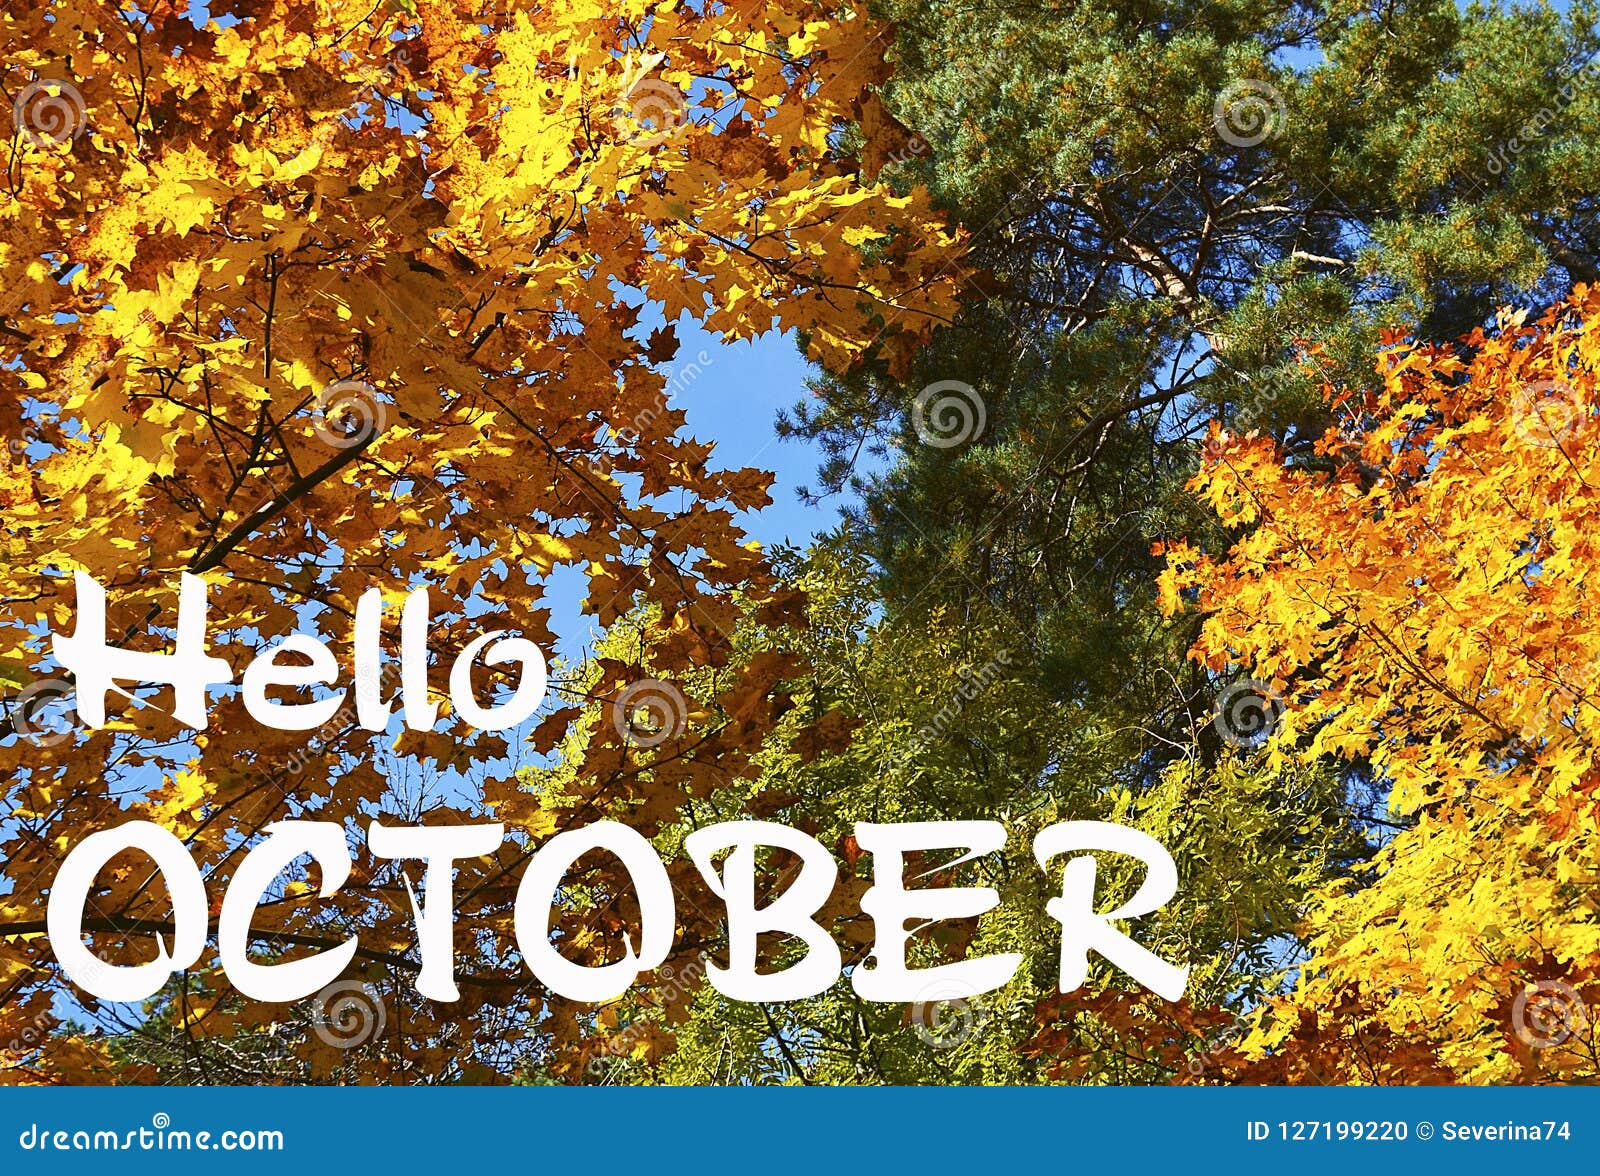 autumn trees with colorful leaves on a blue sky background.hello october.fall season,autumn concept.